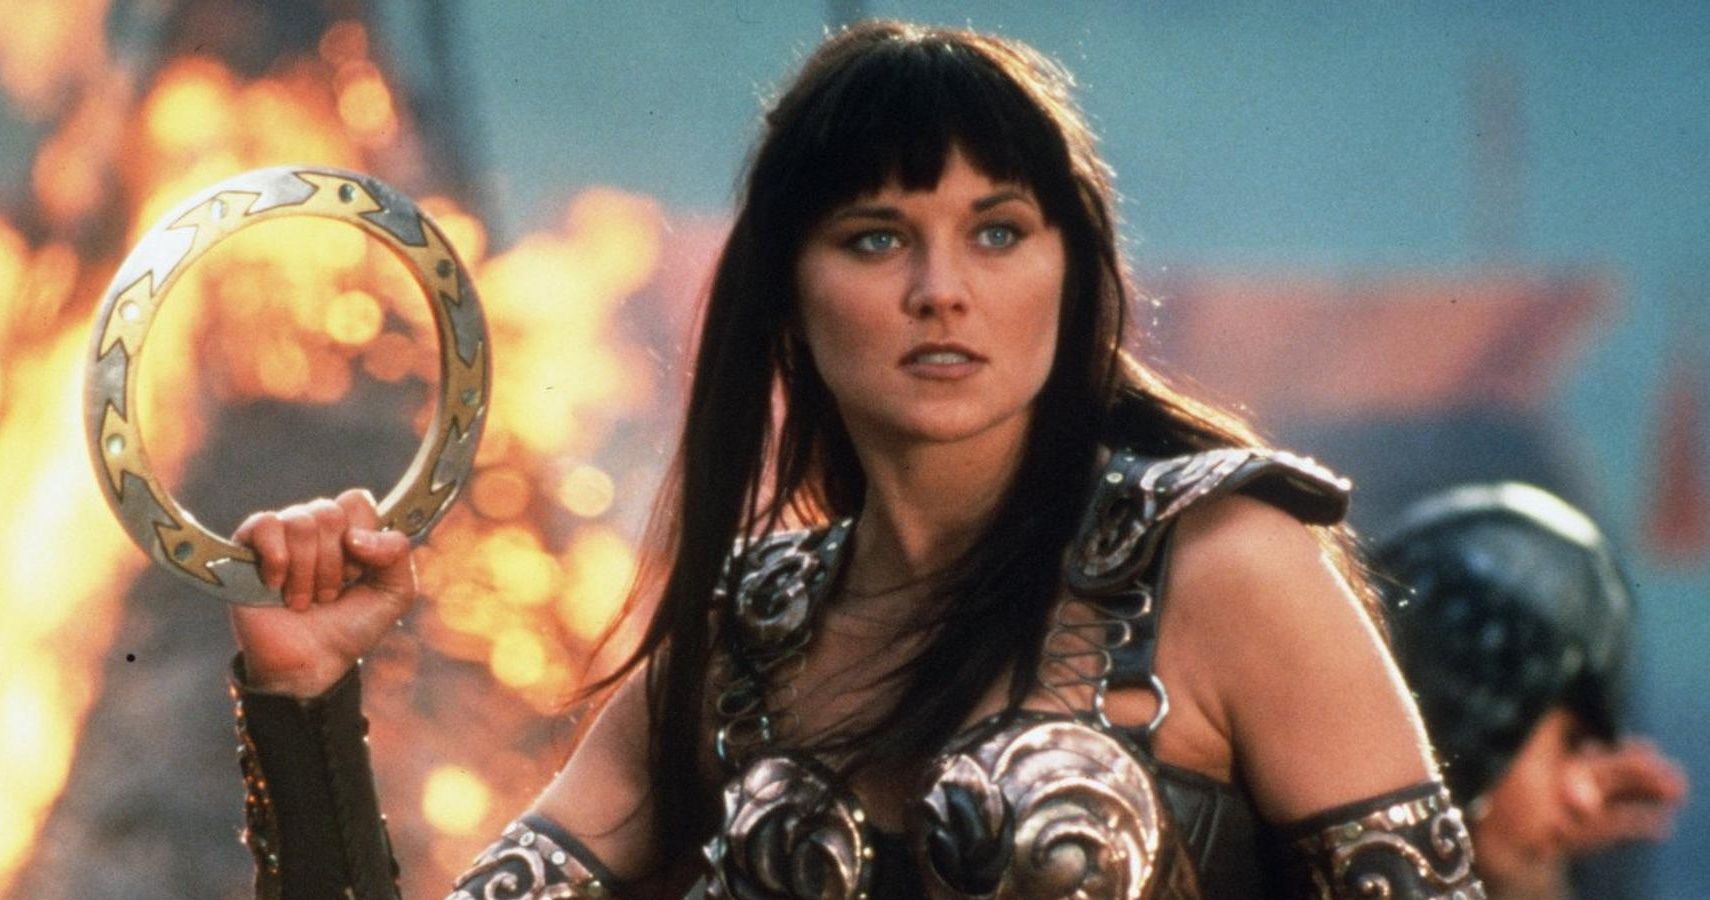 Xena Warrior Princess 10 Best Episodes To Rewatch for the 25th